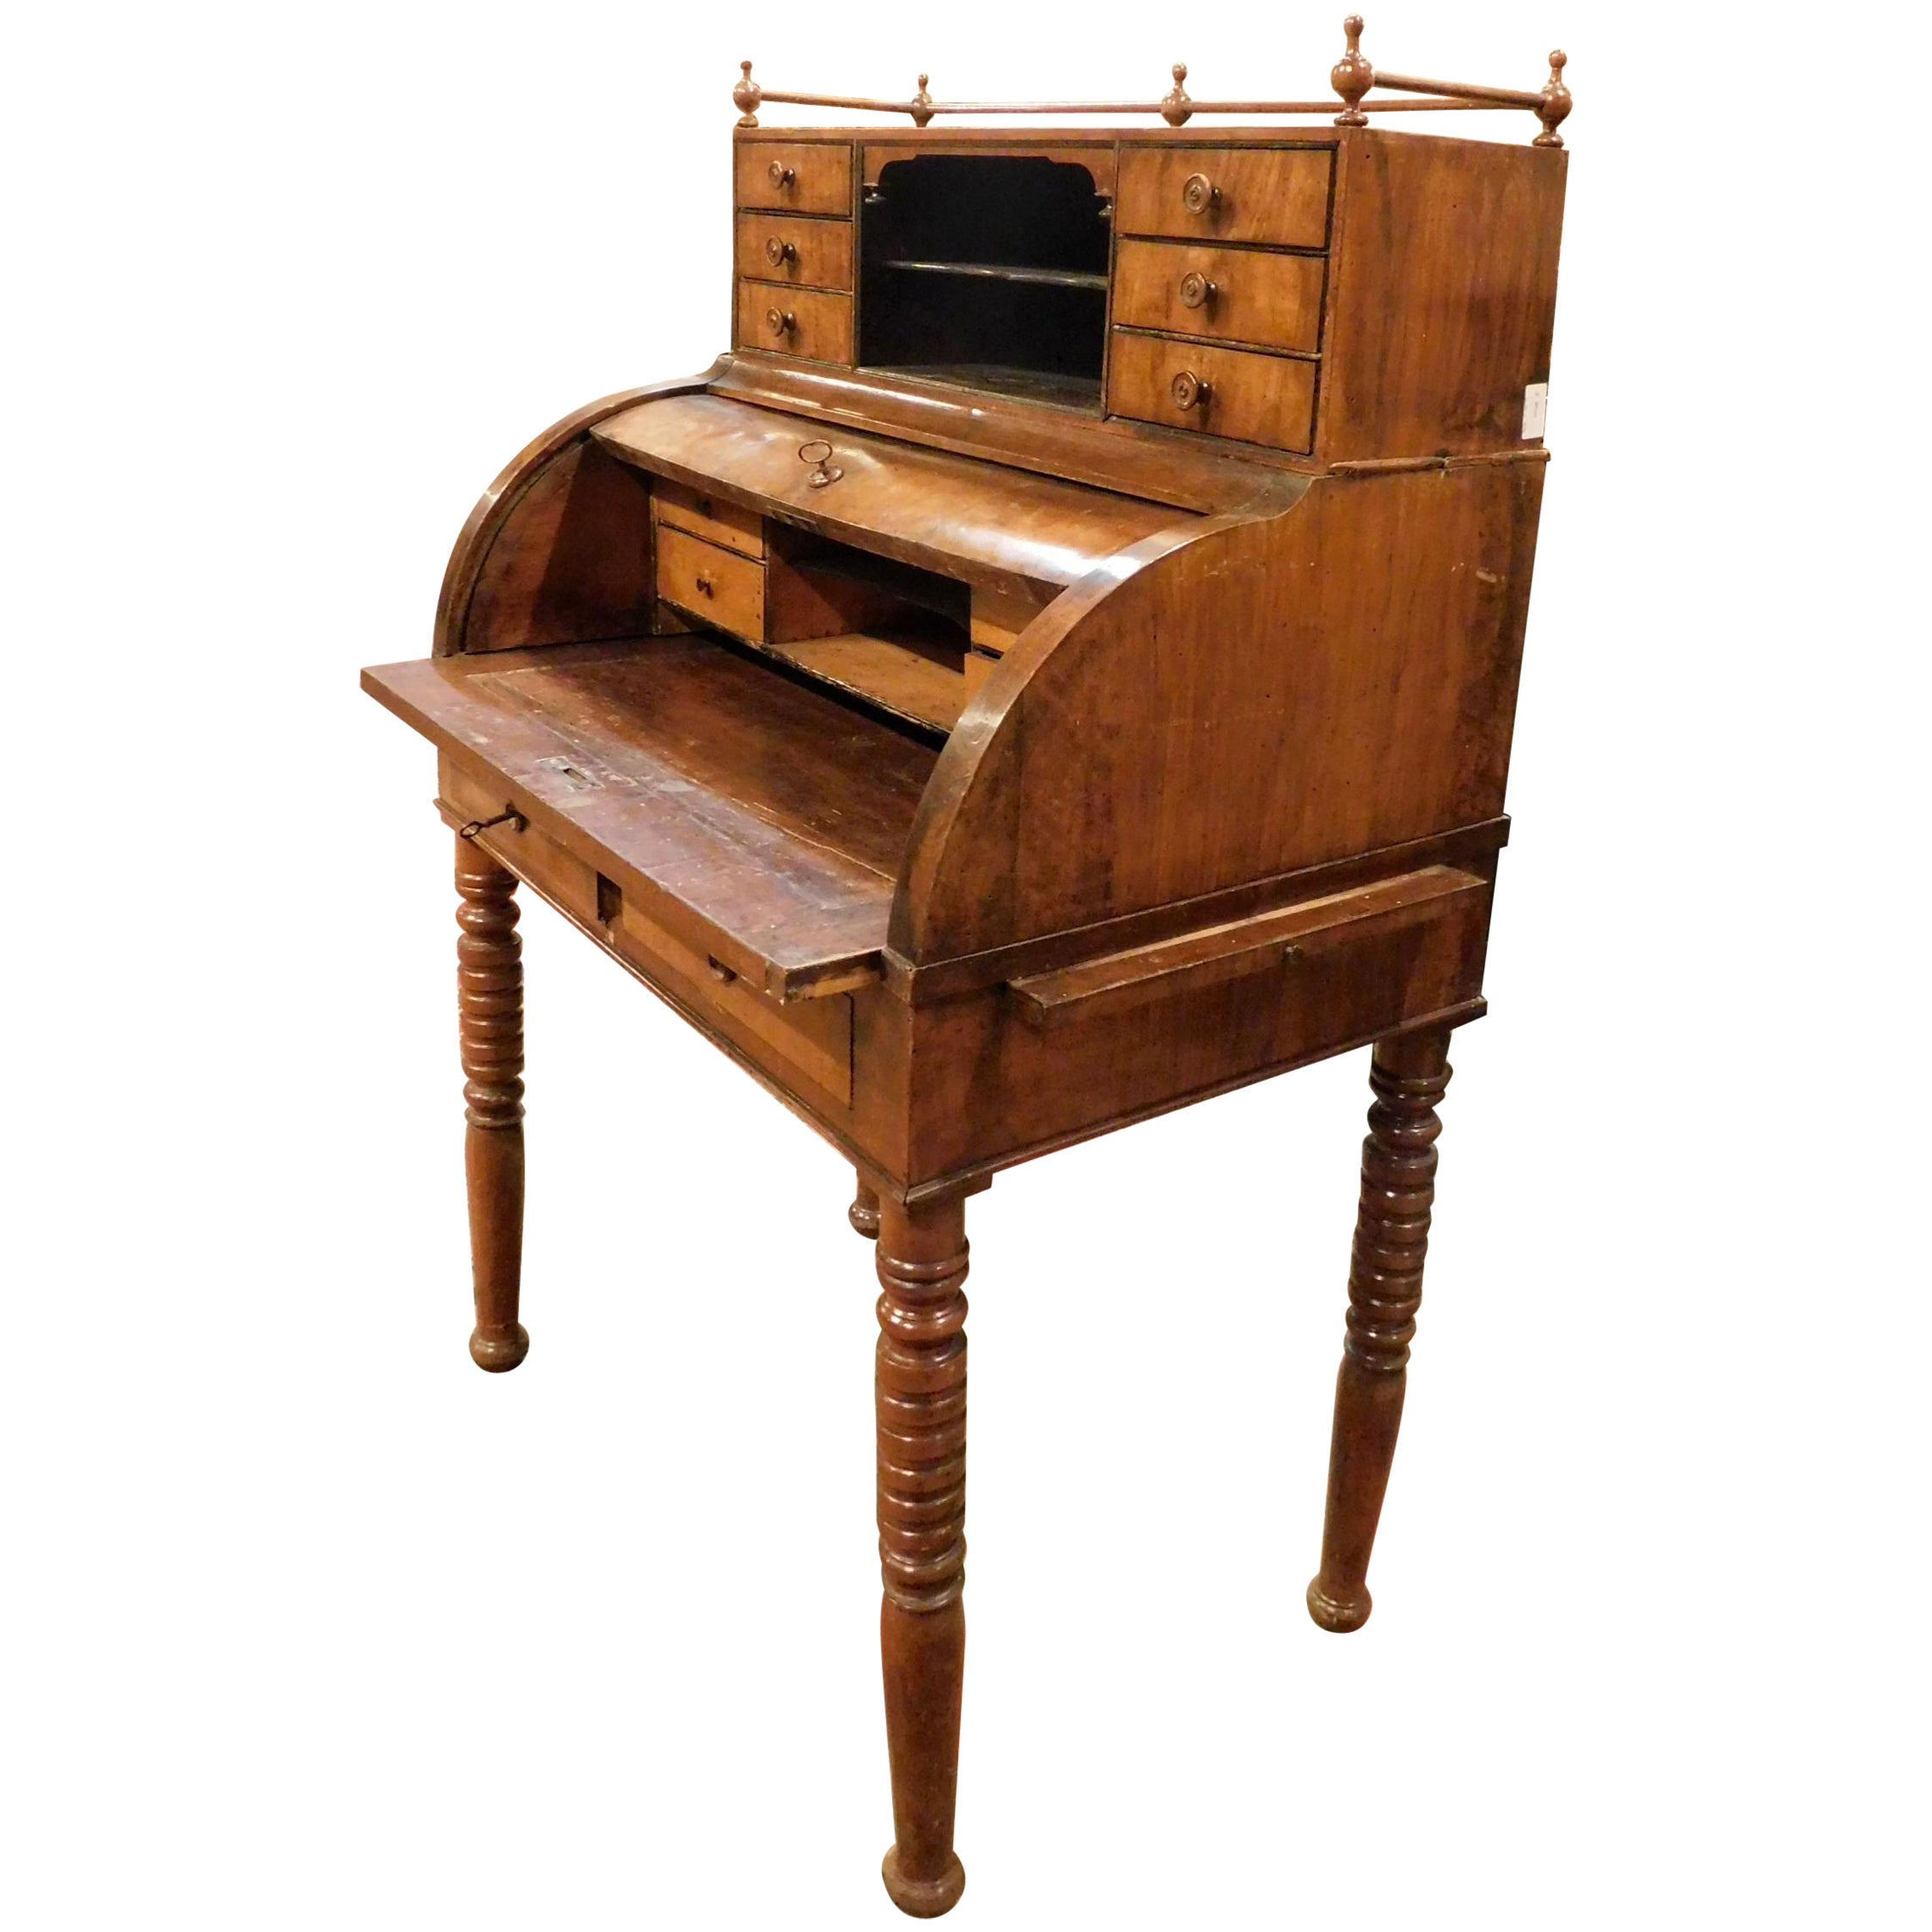 Writing Desk Table in Walnut, Drawers and Pull-Out Shelves, 19th Century Italy For Sale